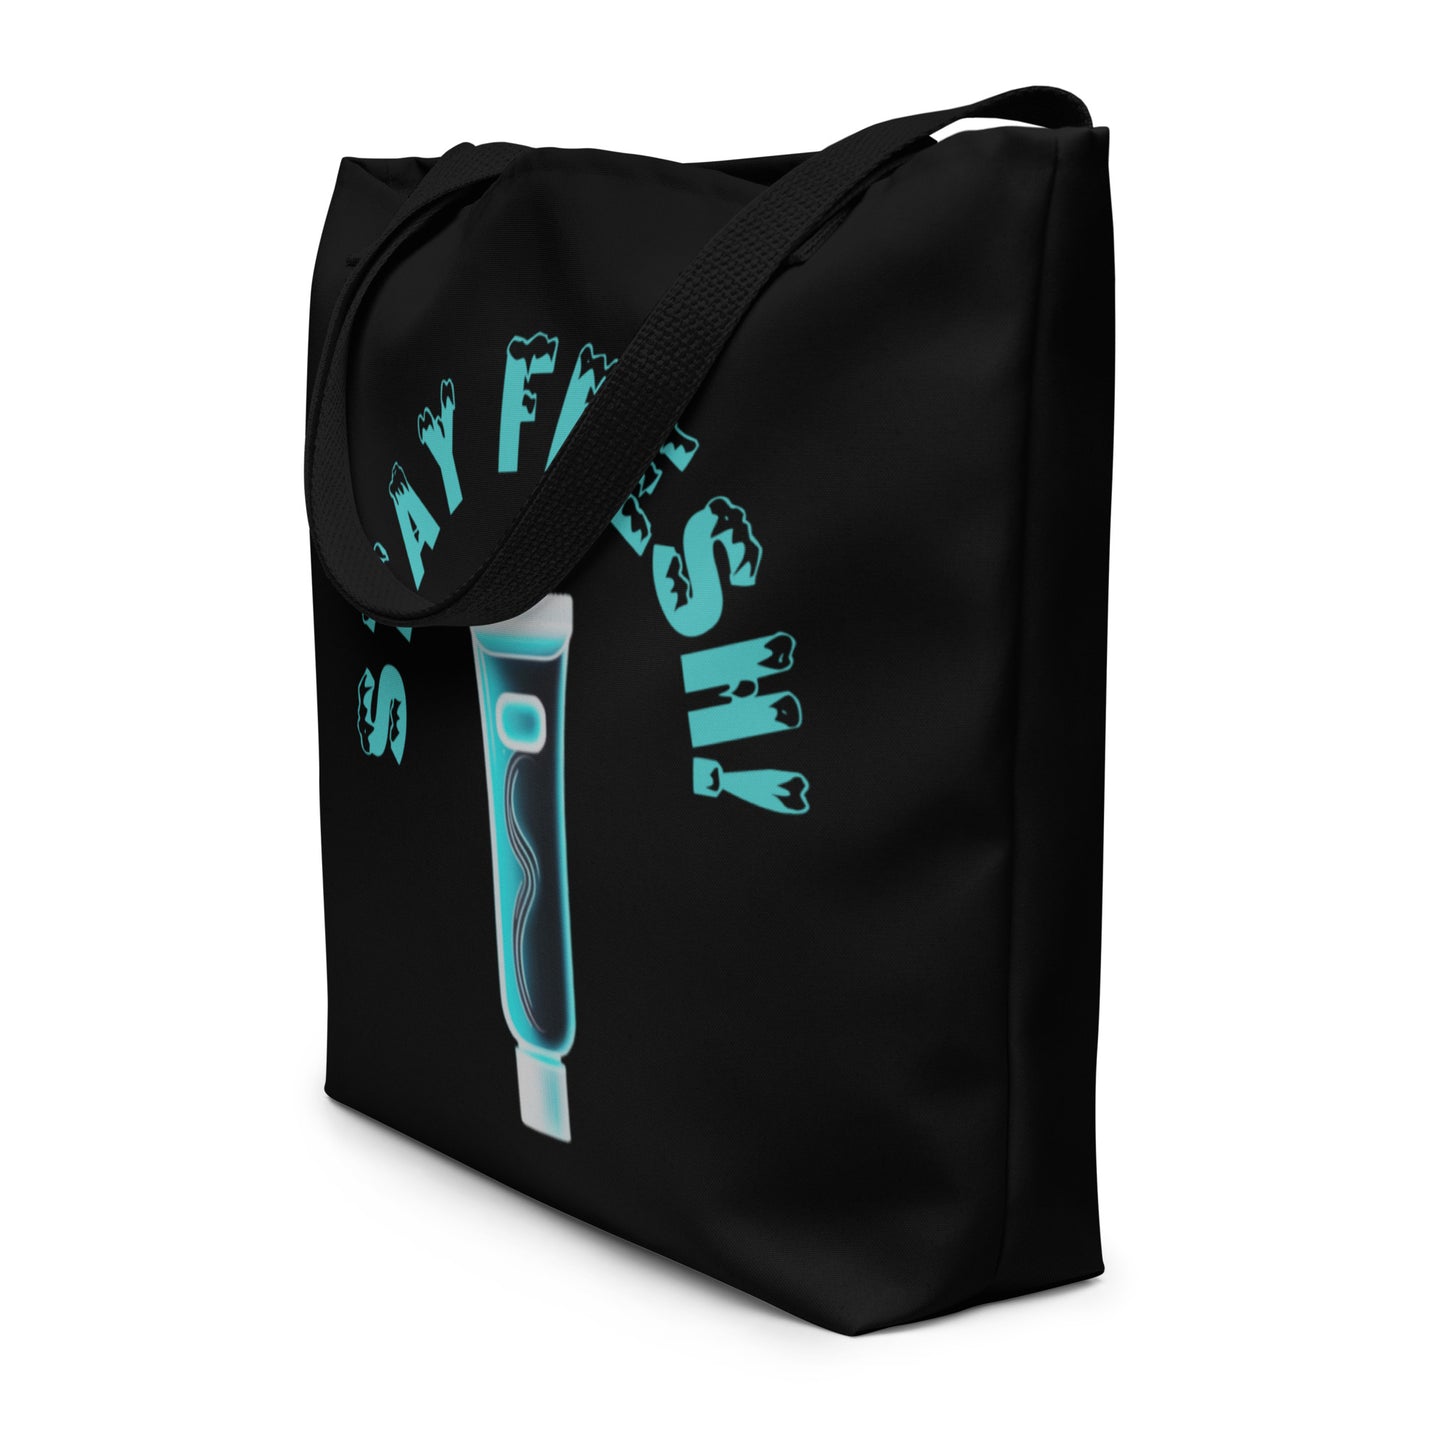 Stay Fresh Large Tote Bag